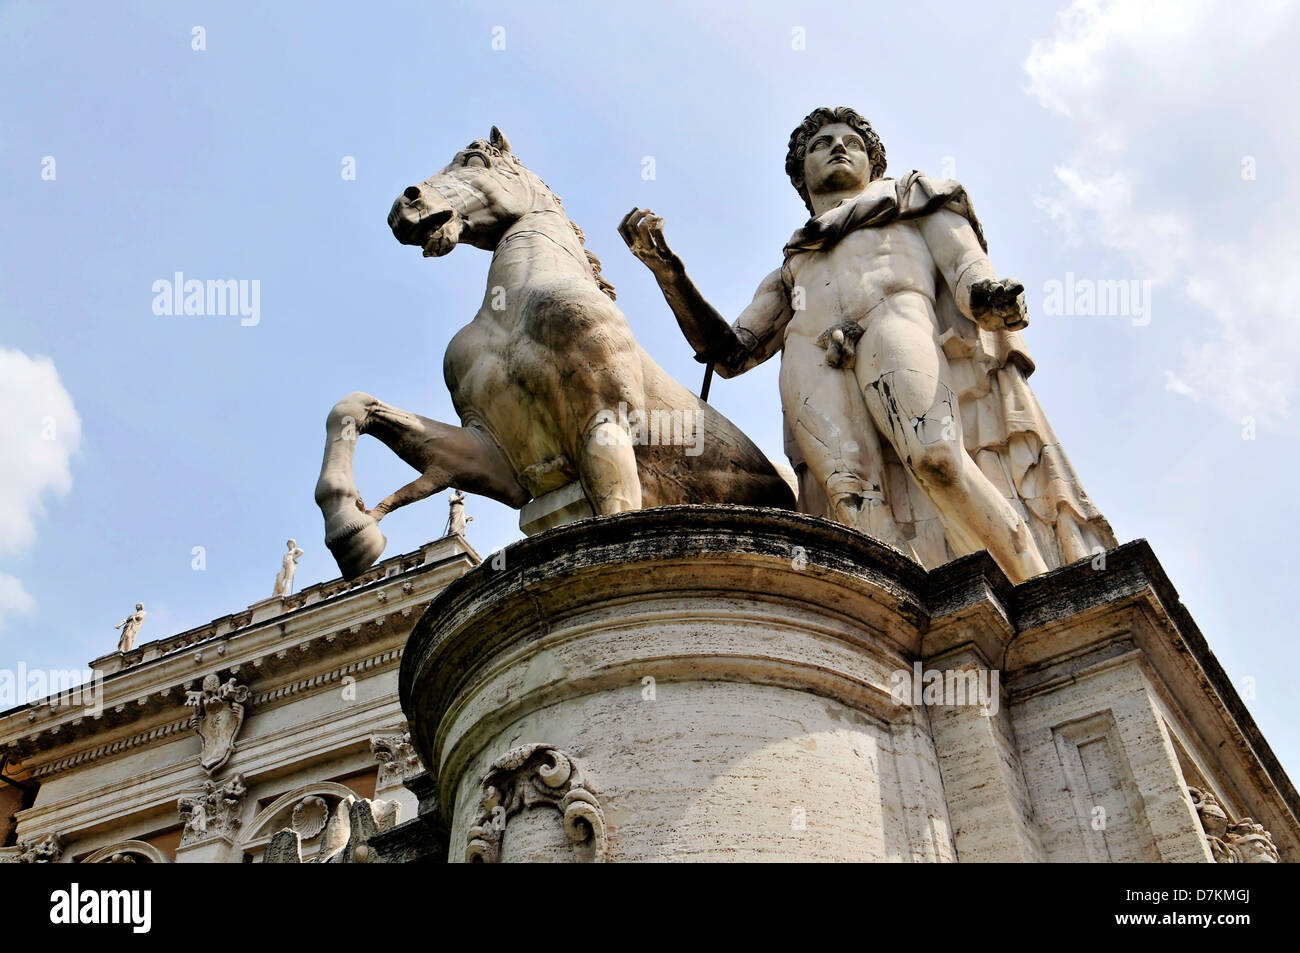 Statue of Castor on Capitoline Hill, Rome, Italy Stock Photo